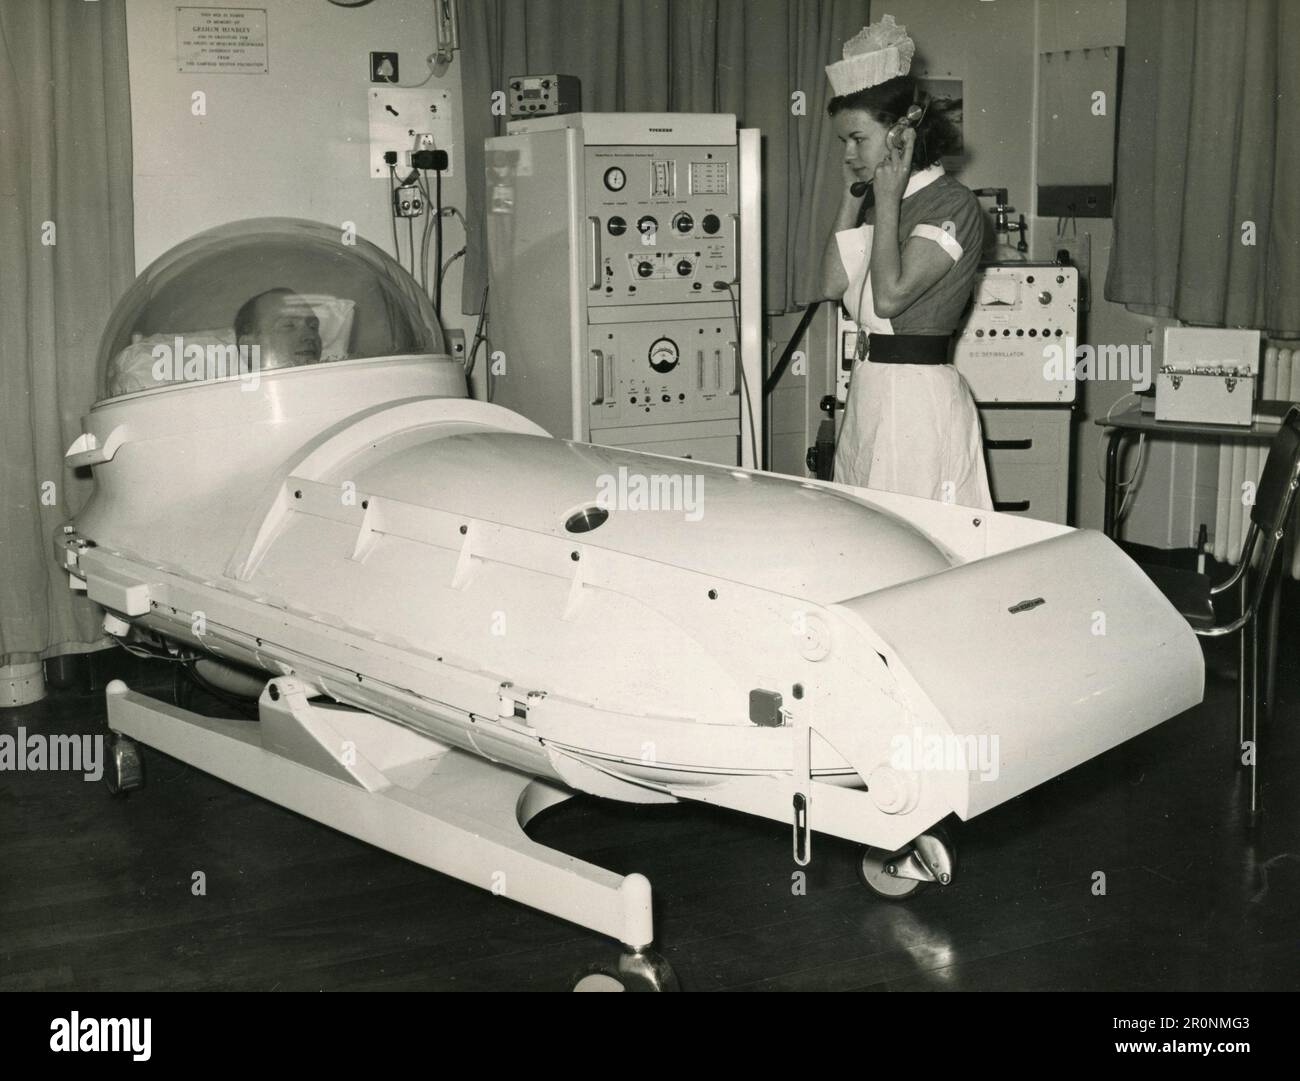 Hyperbaric bed, latest development in oxygen beds, London's Westminster Hospital, UK 1966 Stock Photo